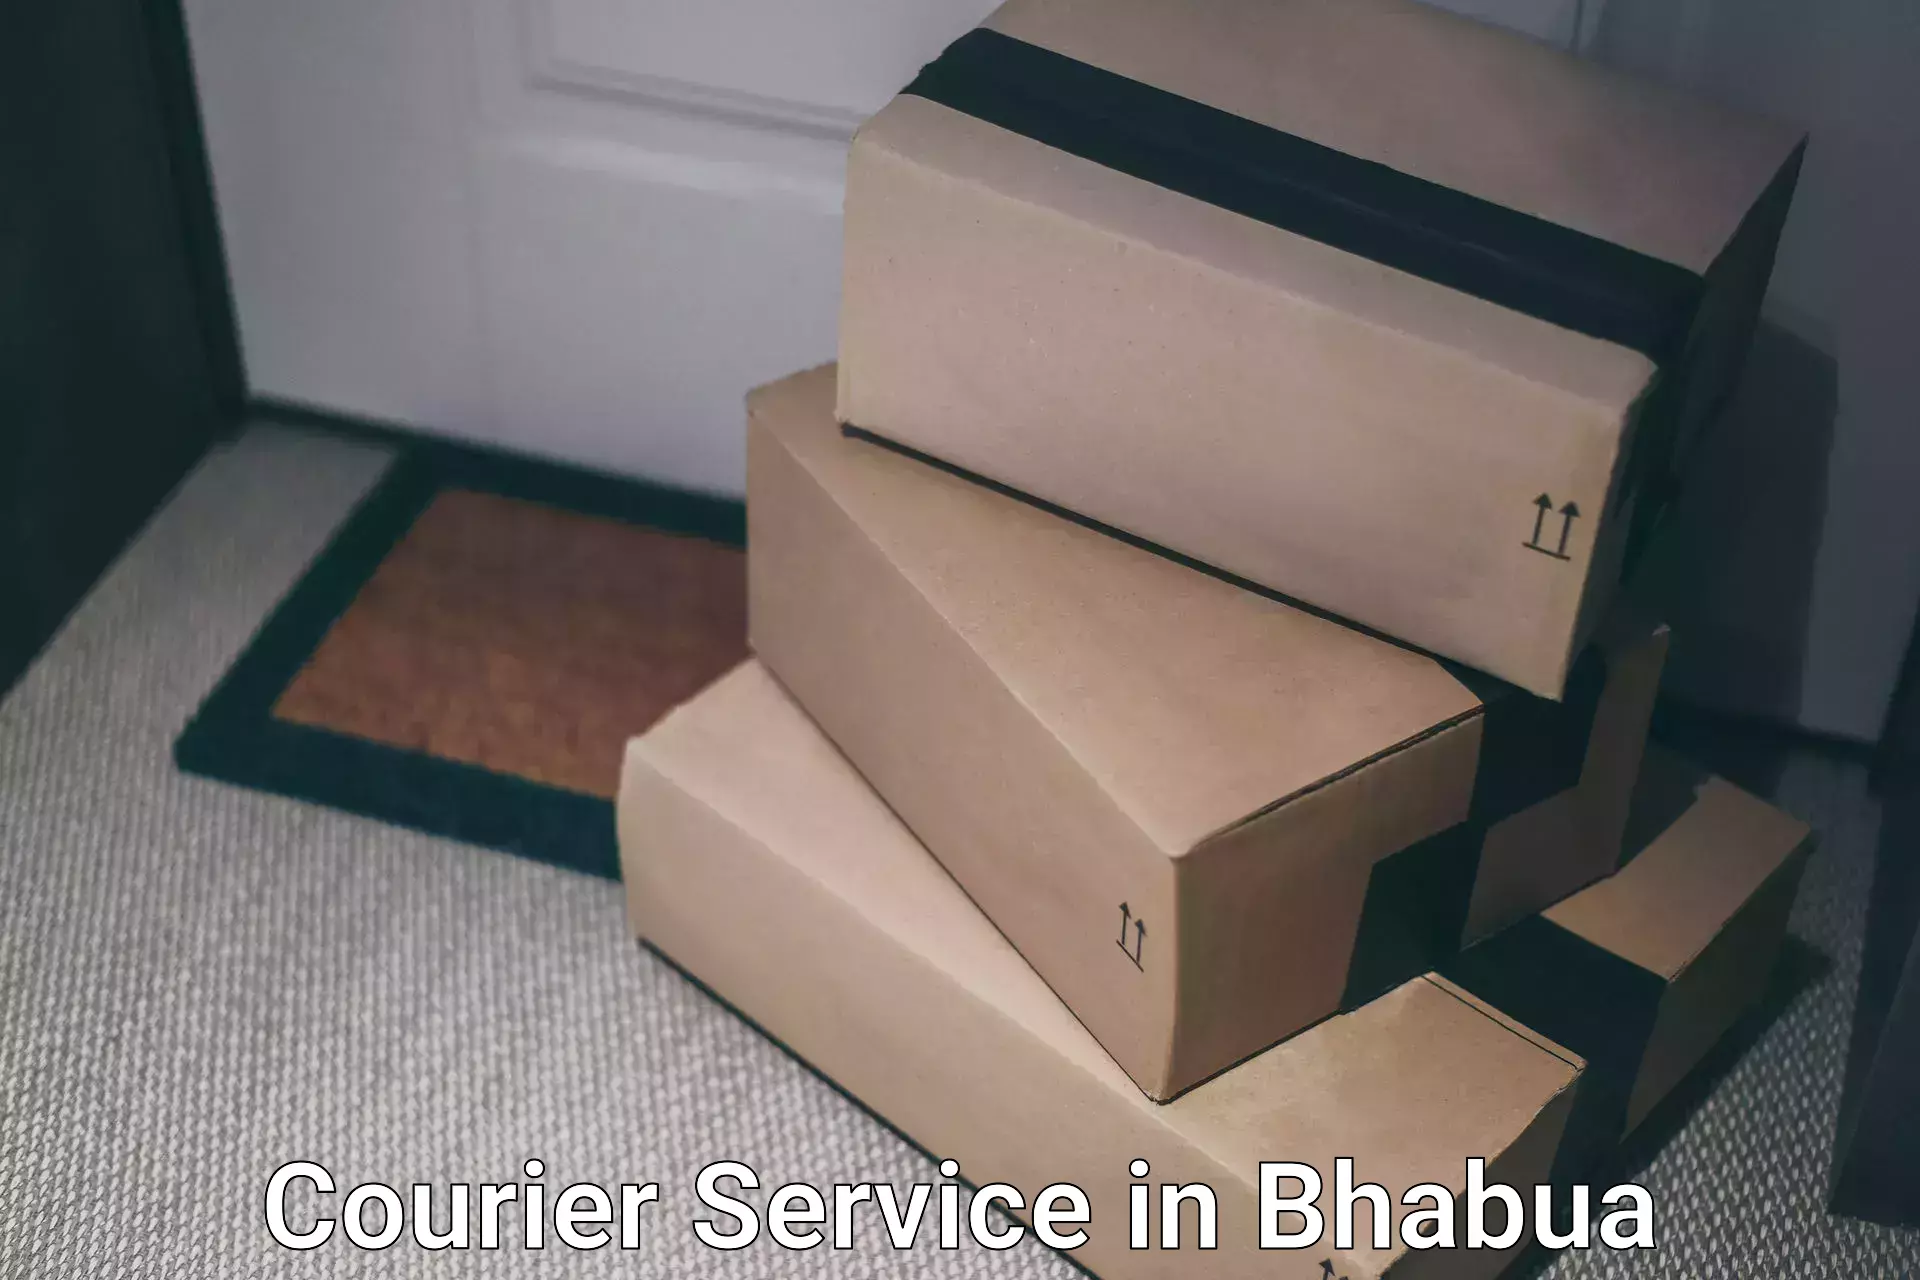 Rapid shipping services in Bhabua